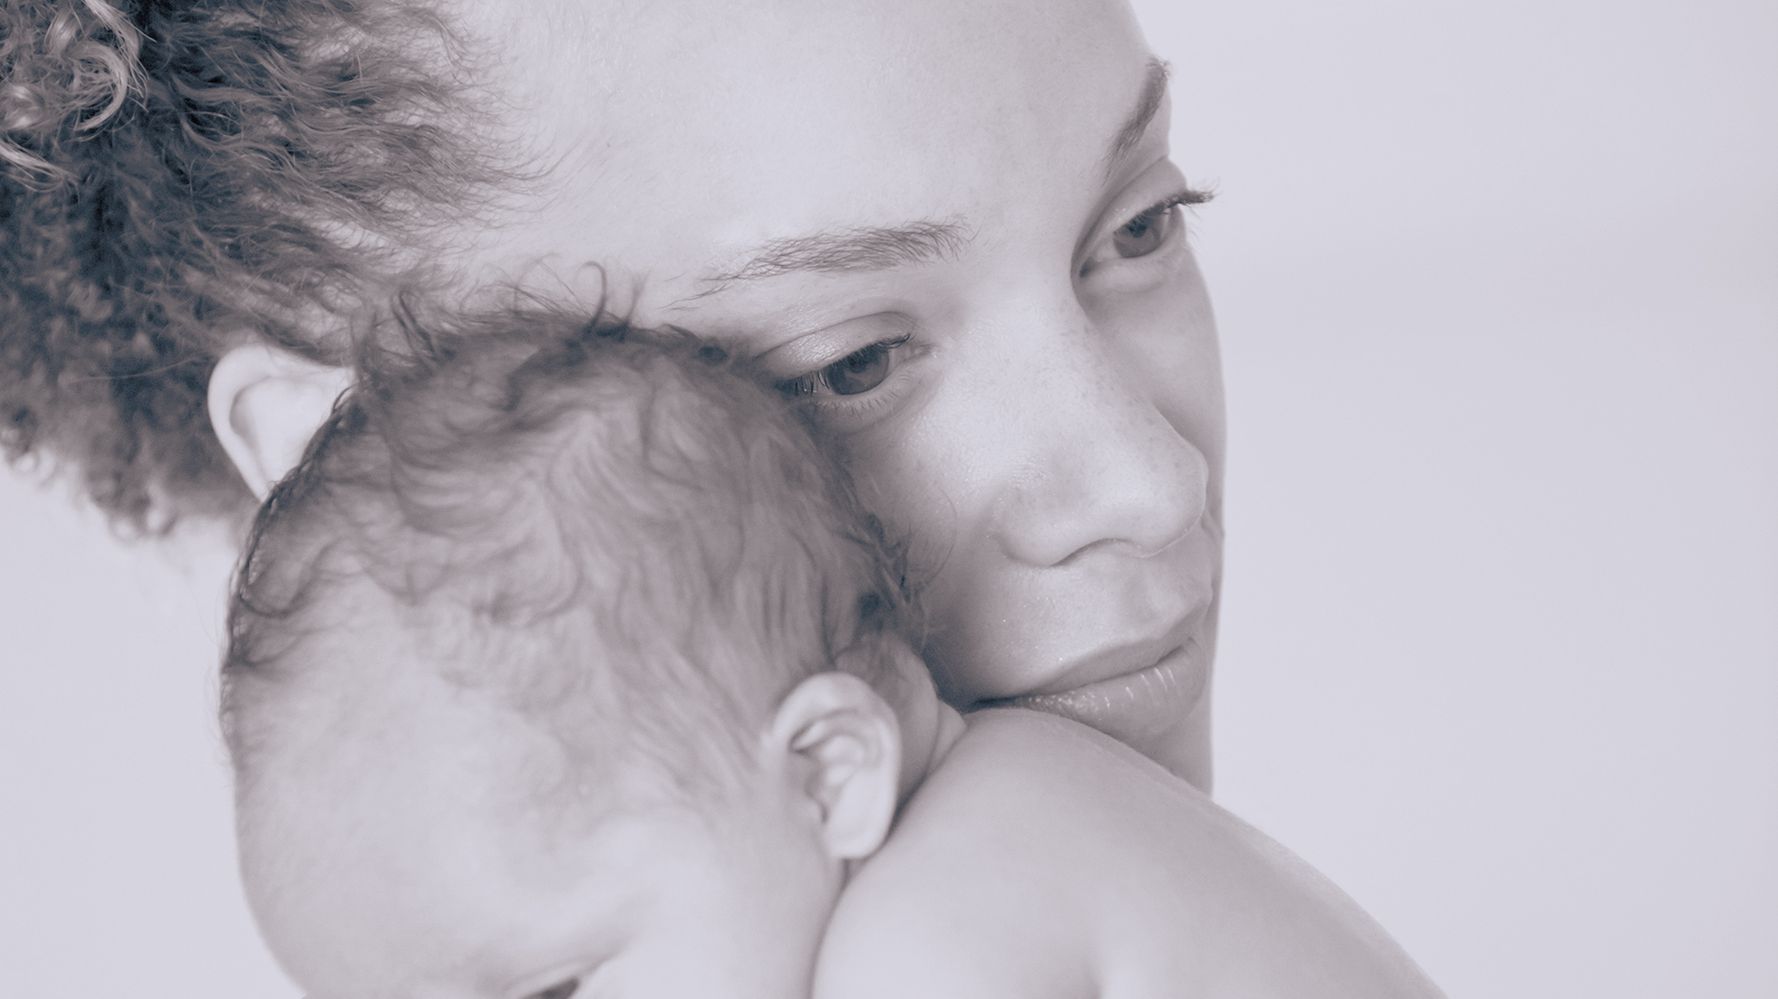 5 Useful Resources For New Moms Struggling With Their Mental Health